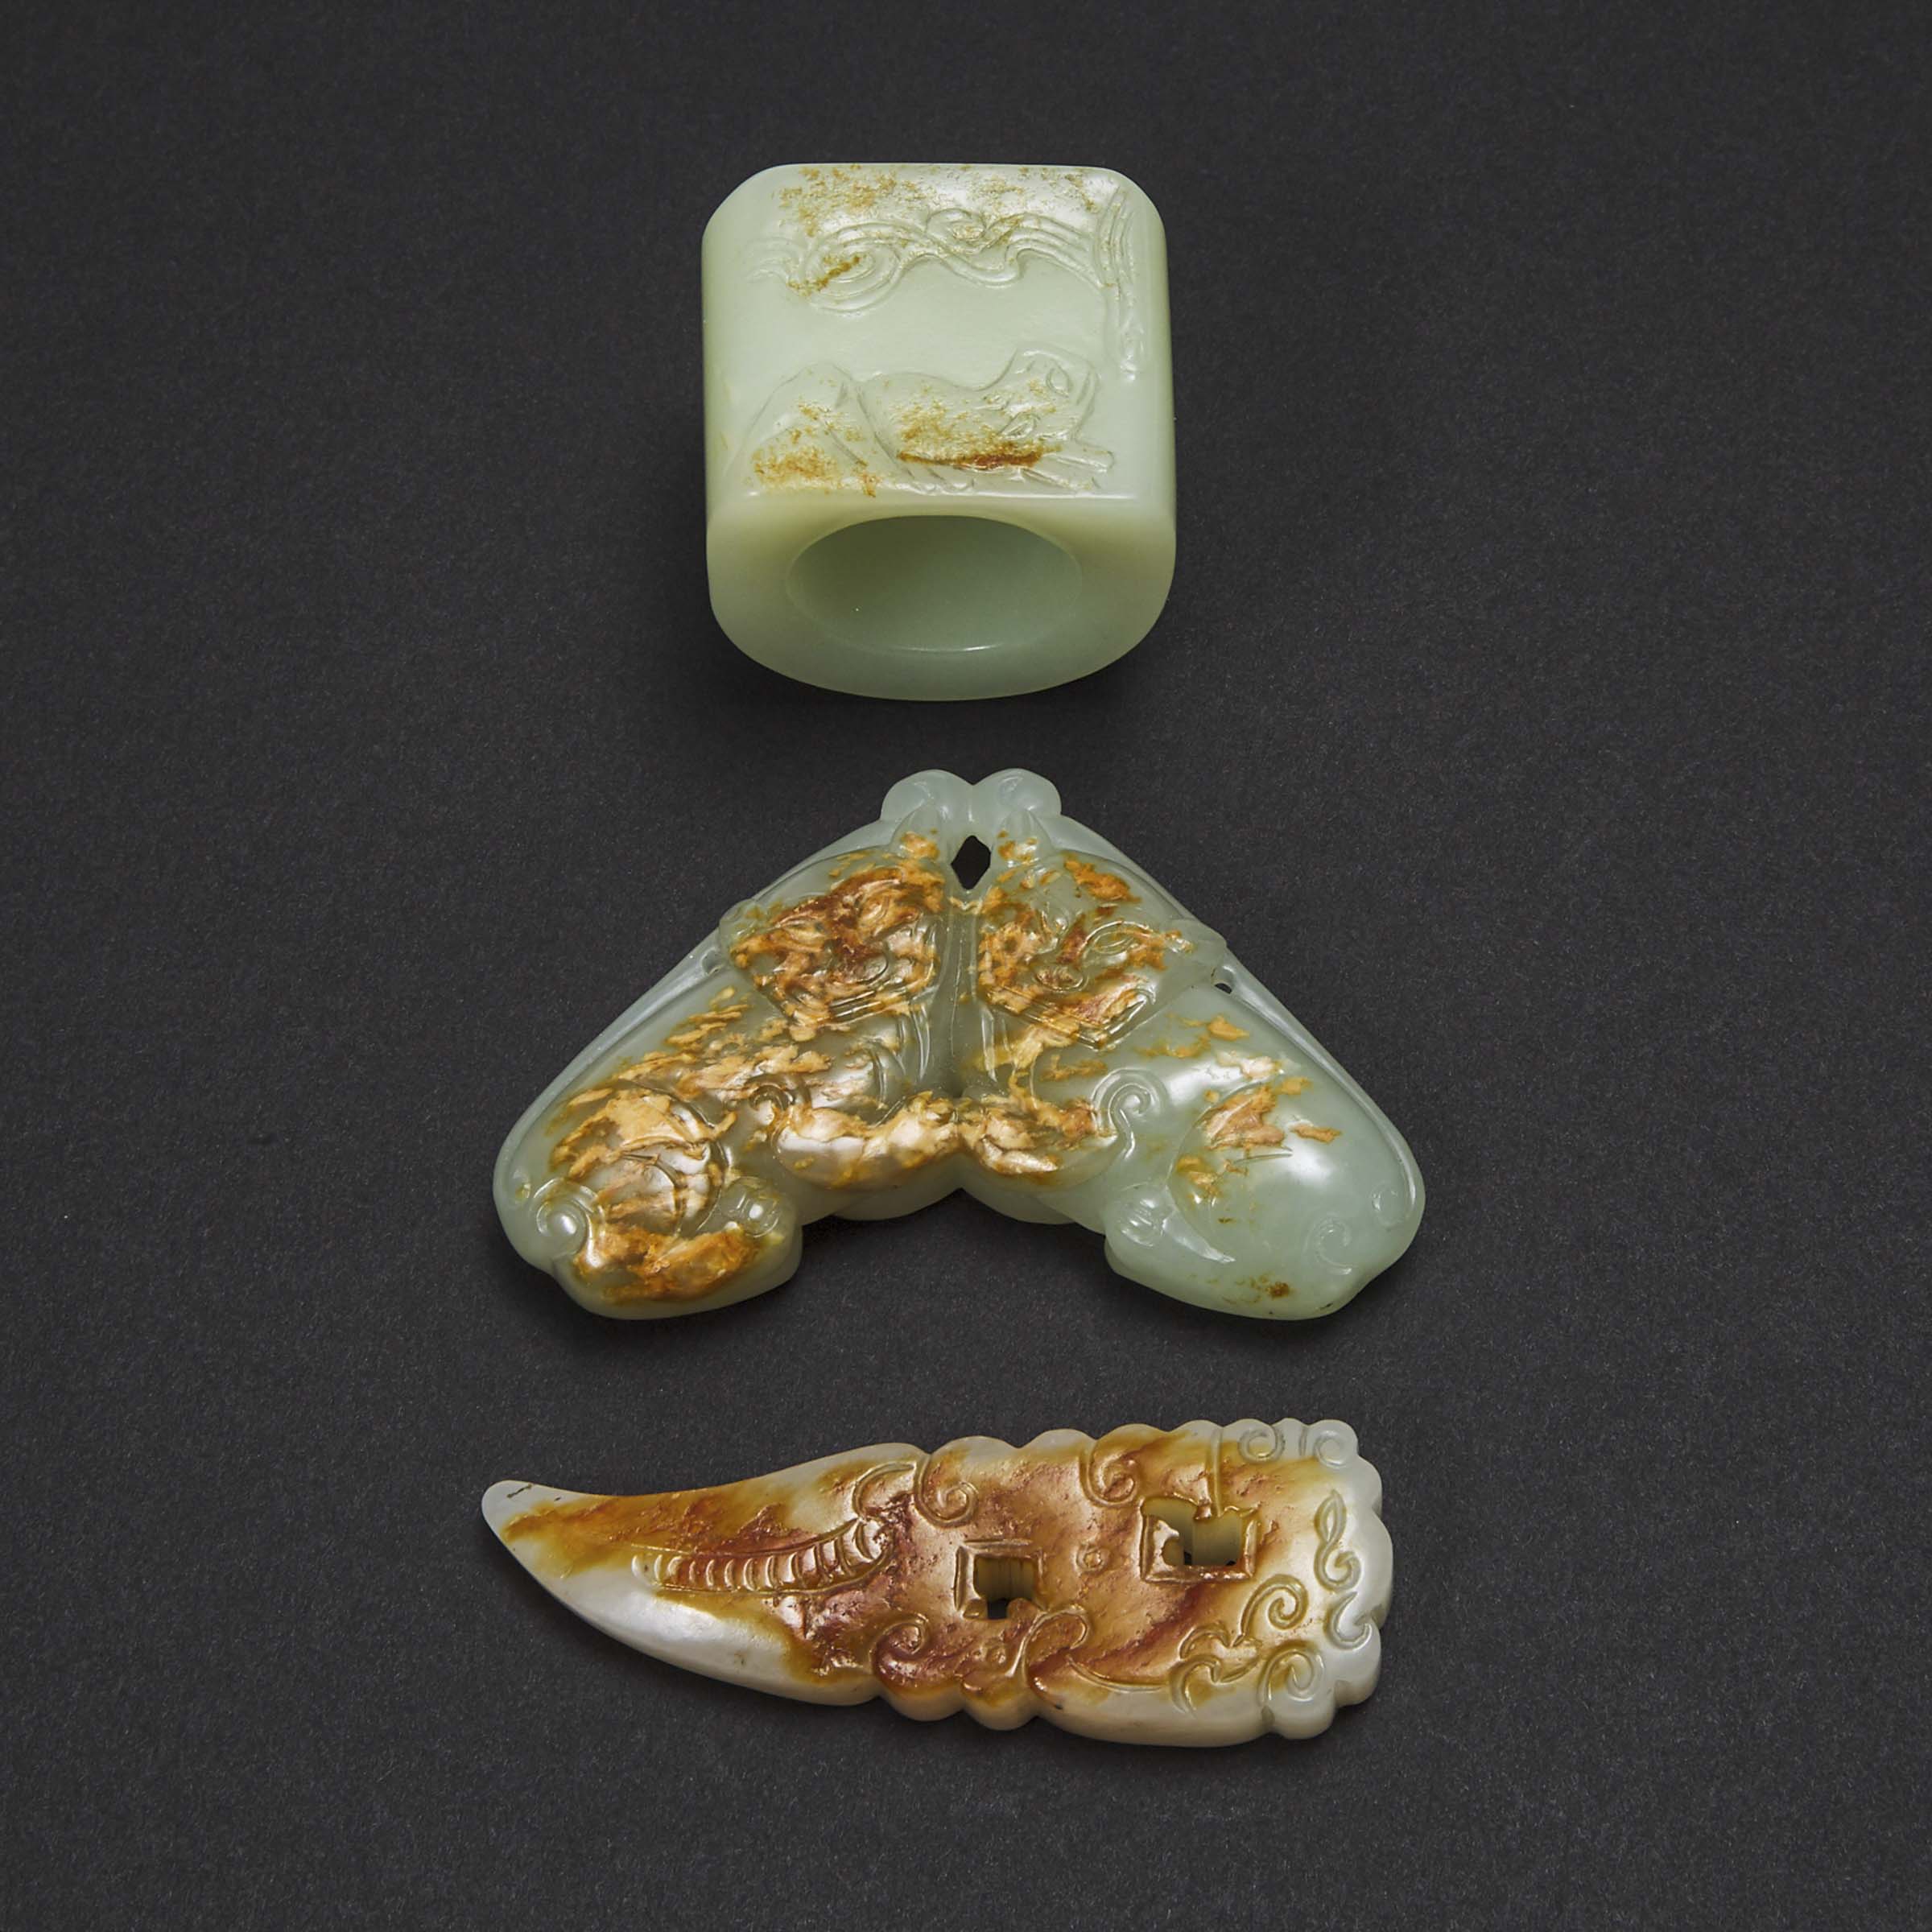 A Jade Archer's Ring, 'Xi' Pendant, and 'Lion' Chime-Shaped Pendant